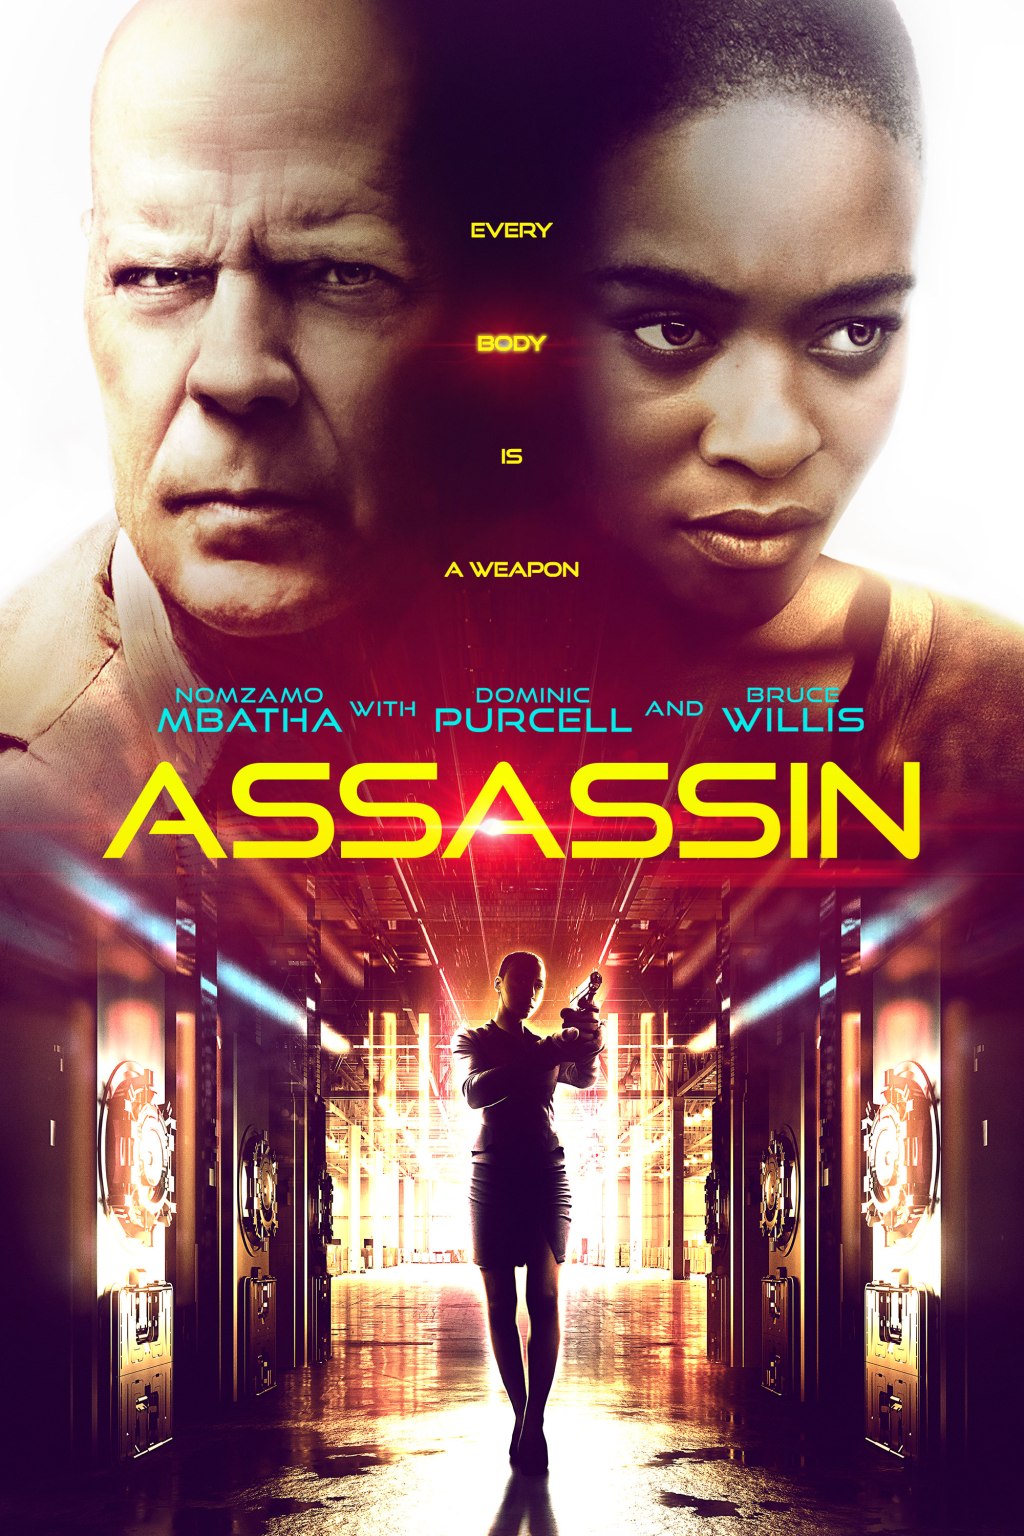 Nomzamo Mbatha and Bruce Willis in a scene from the sci-fi thriller 'Assassin'.